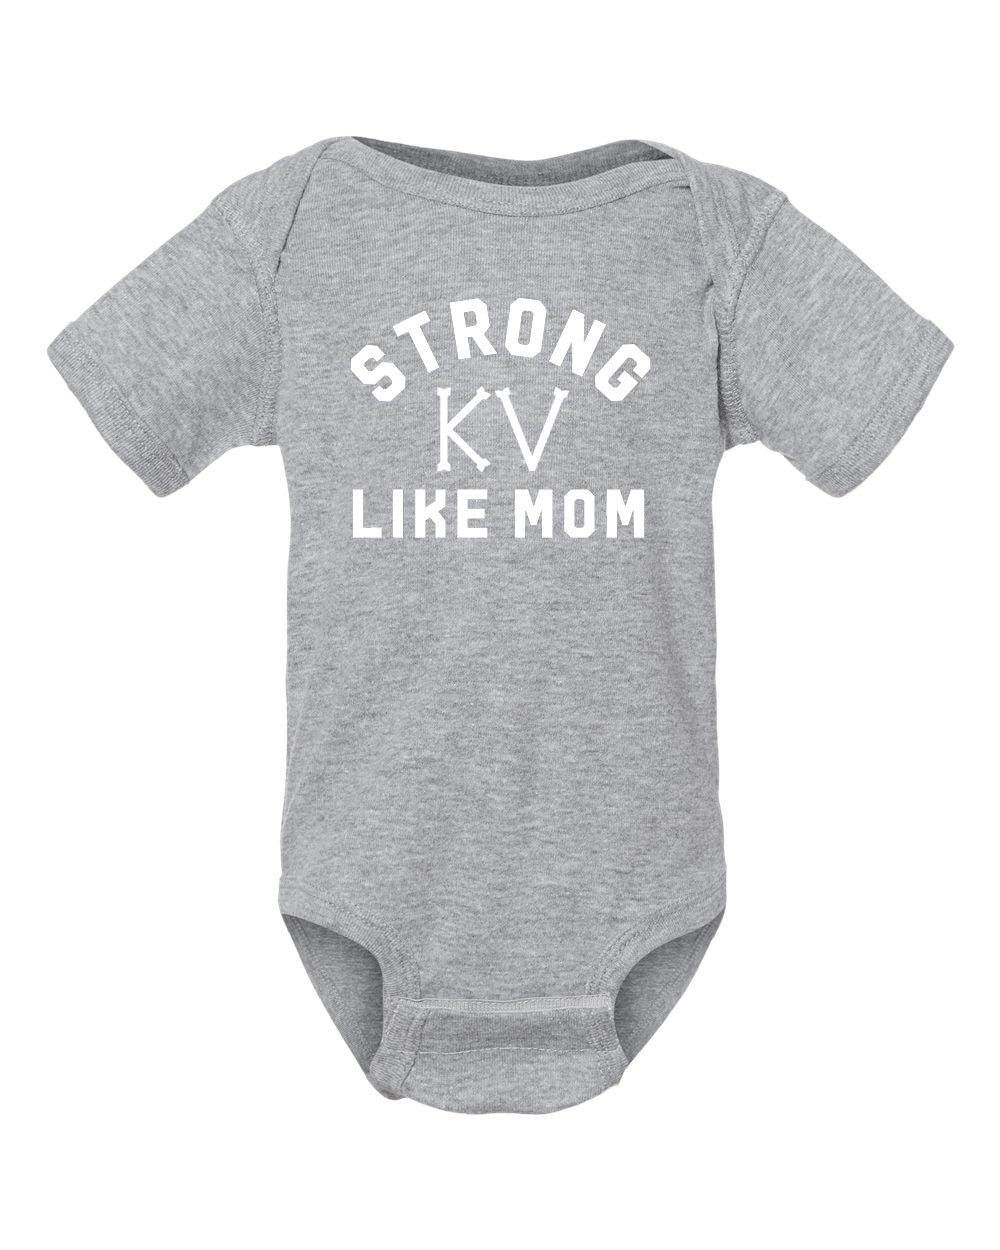 Strong Like Dad/Mom Onesie